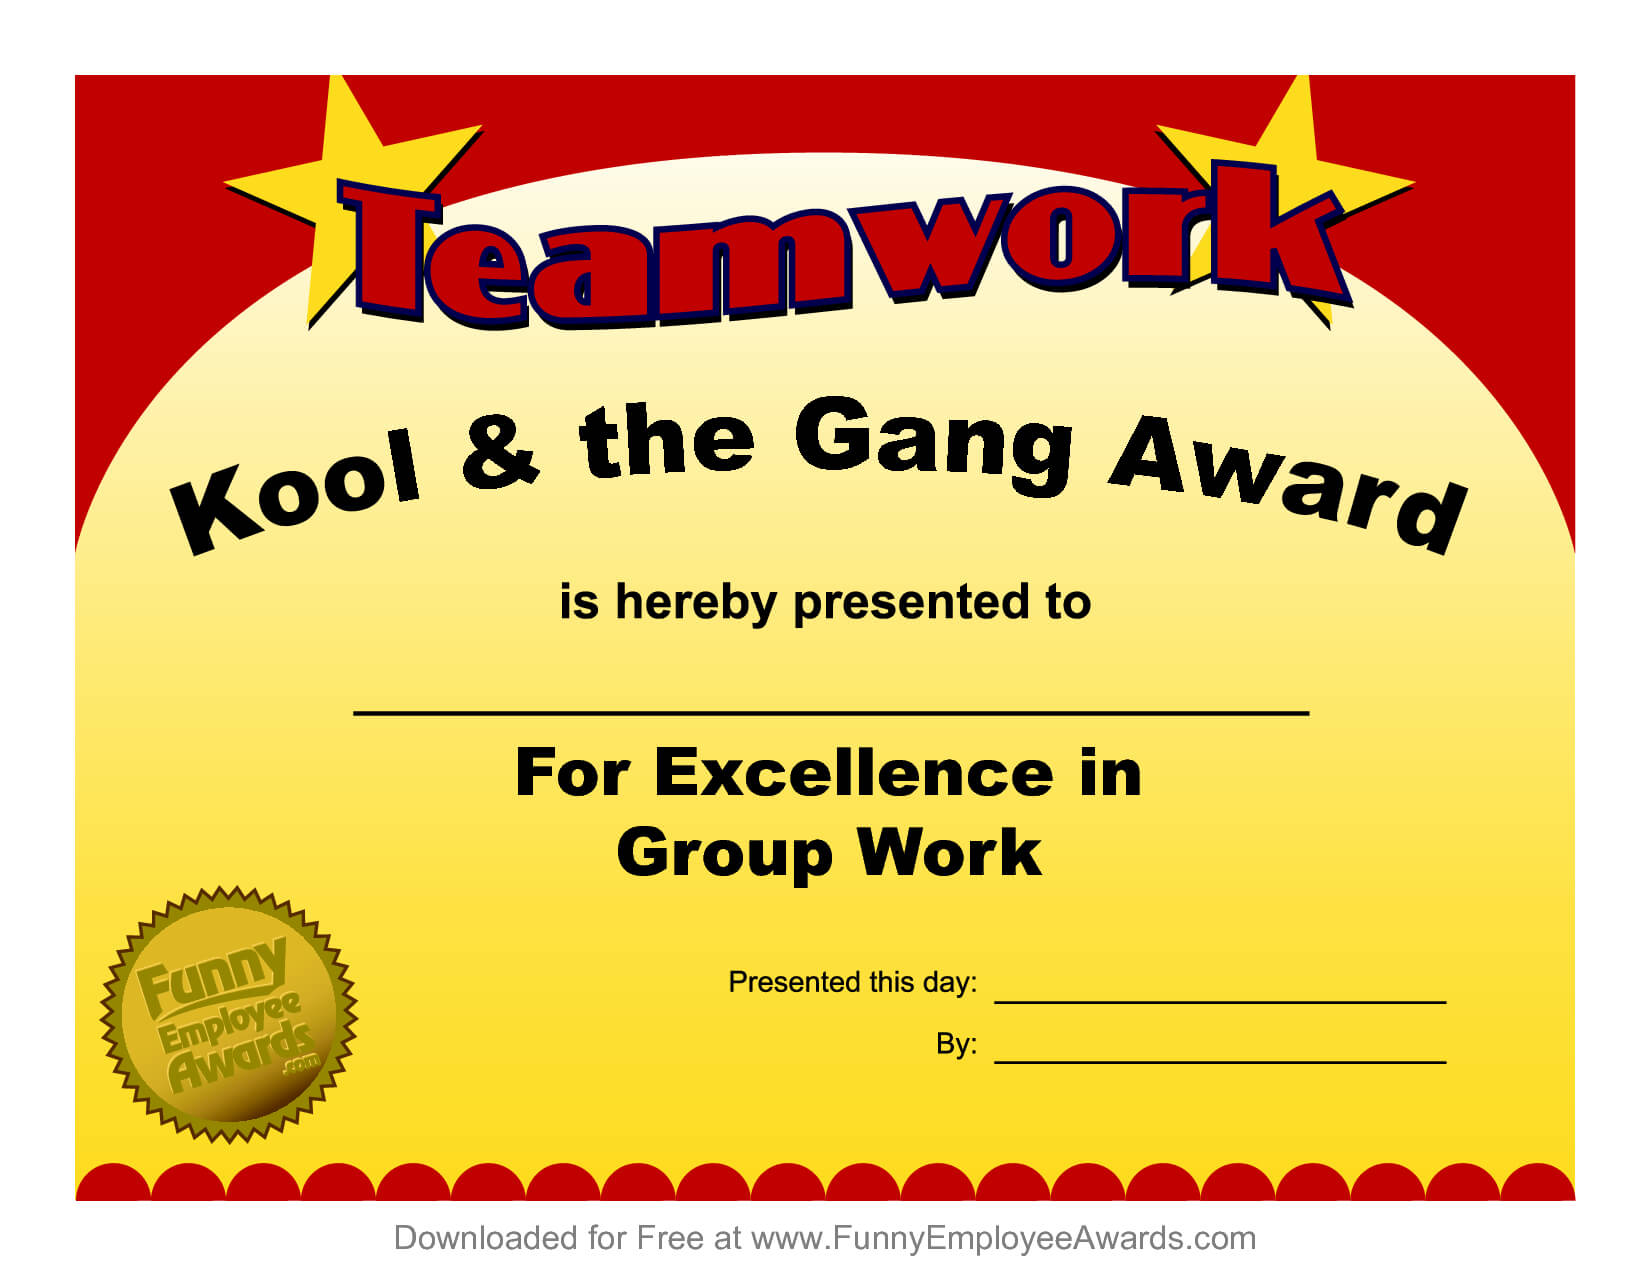 Fun Award Templatefree Employee Award Certificate Templates Intended For Free Funny Award Certificate Templates For Word